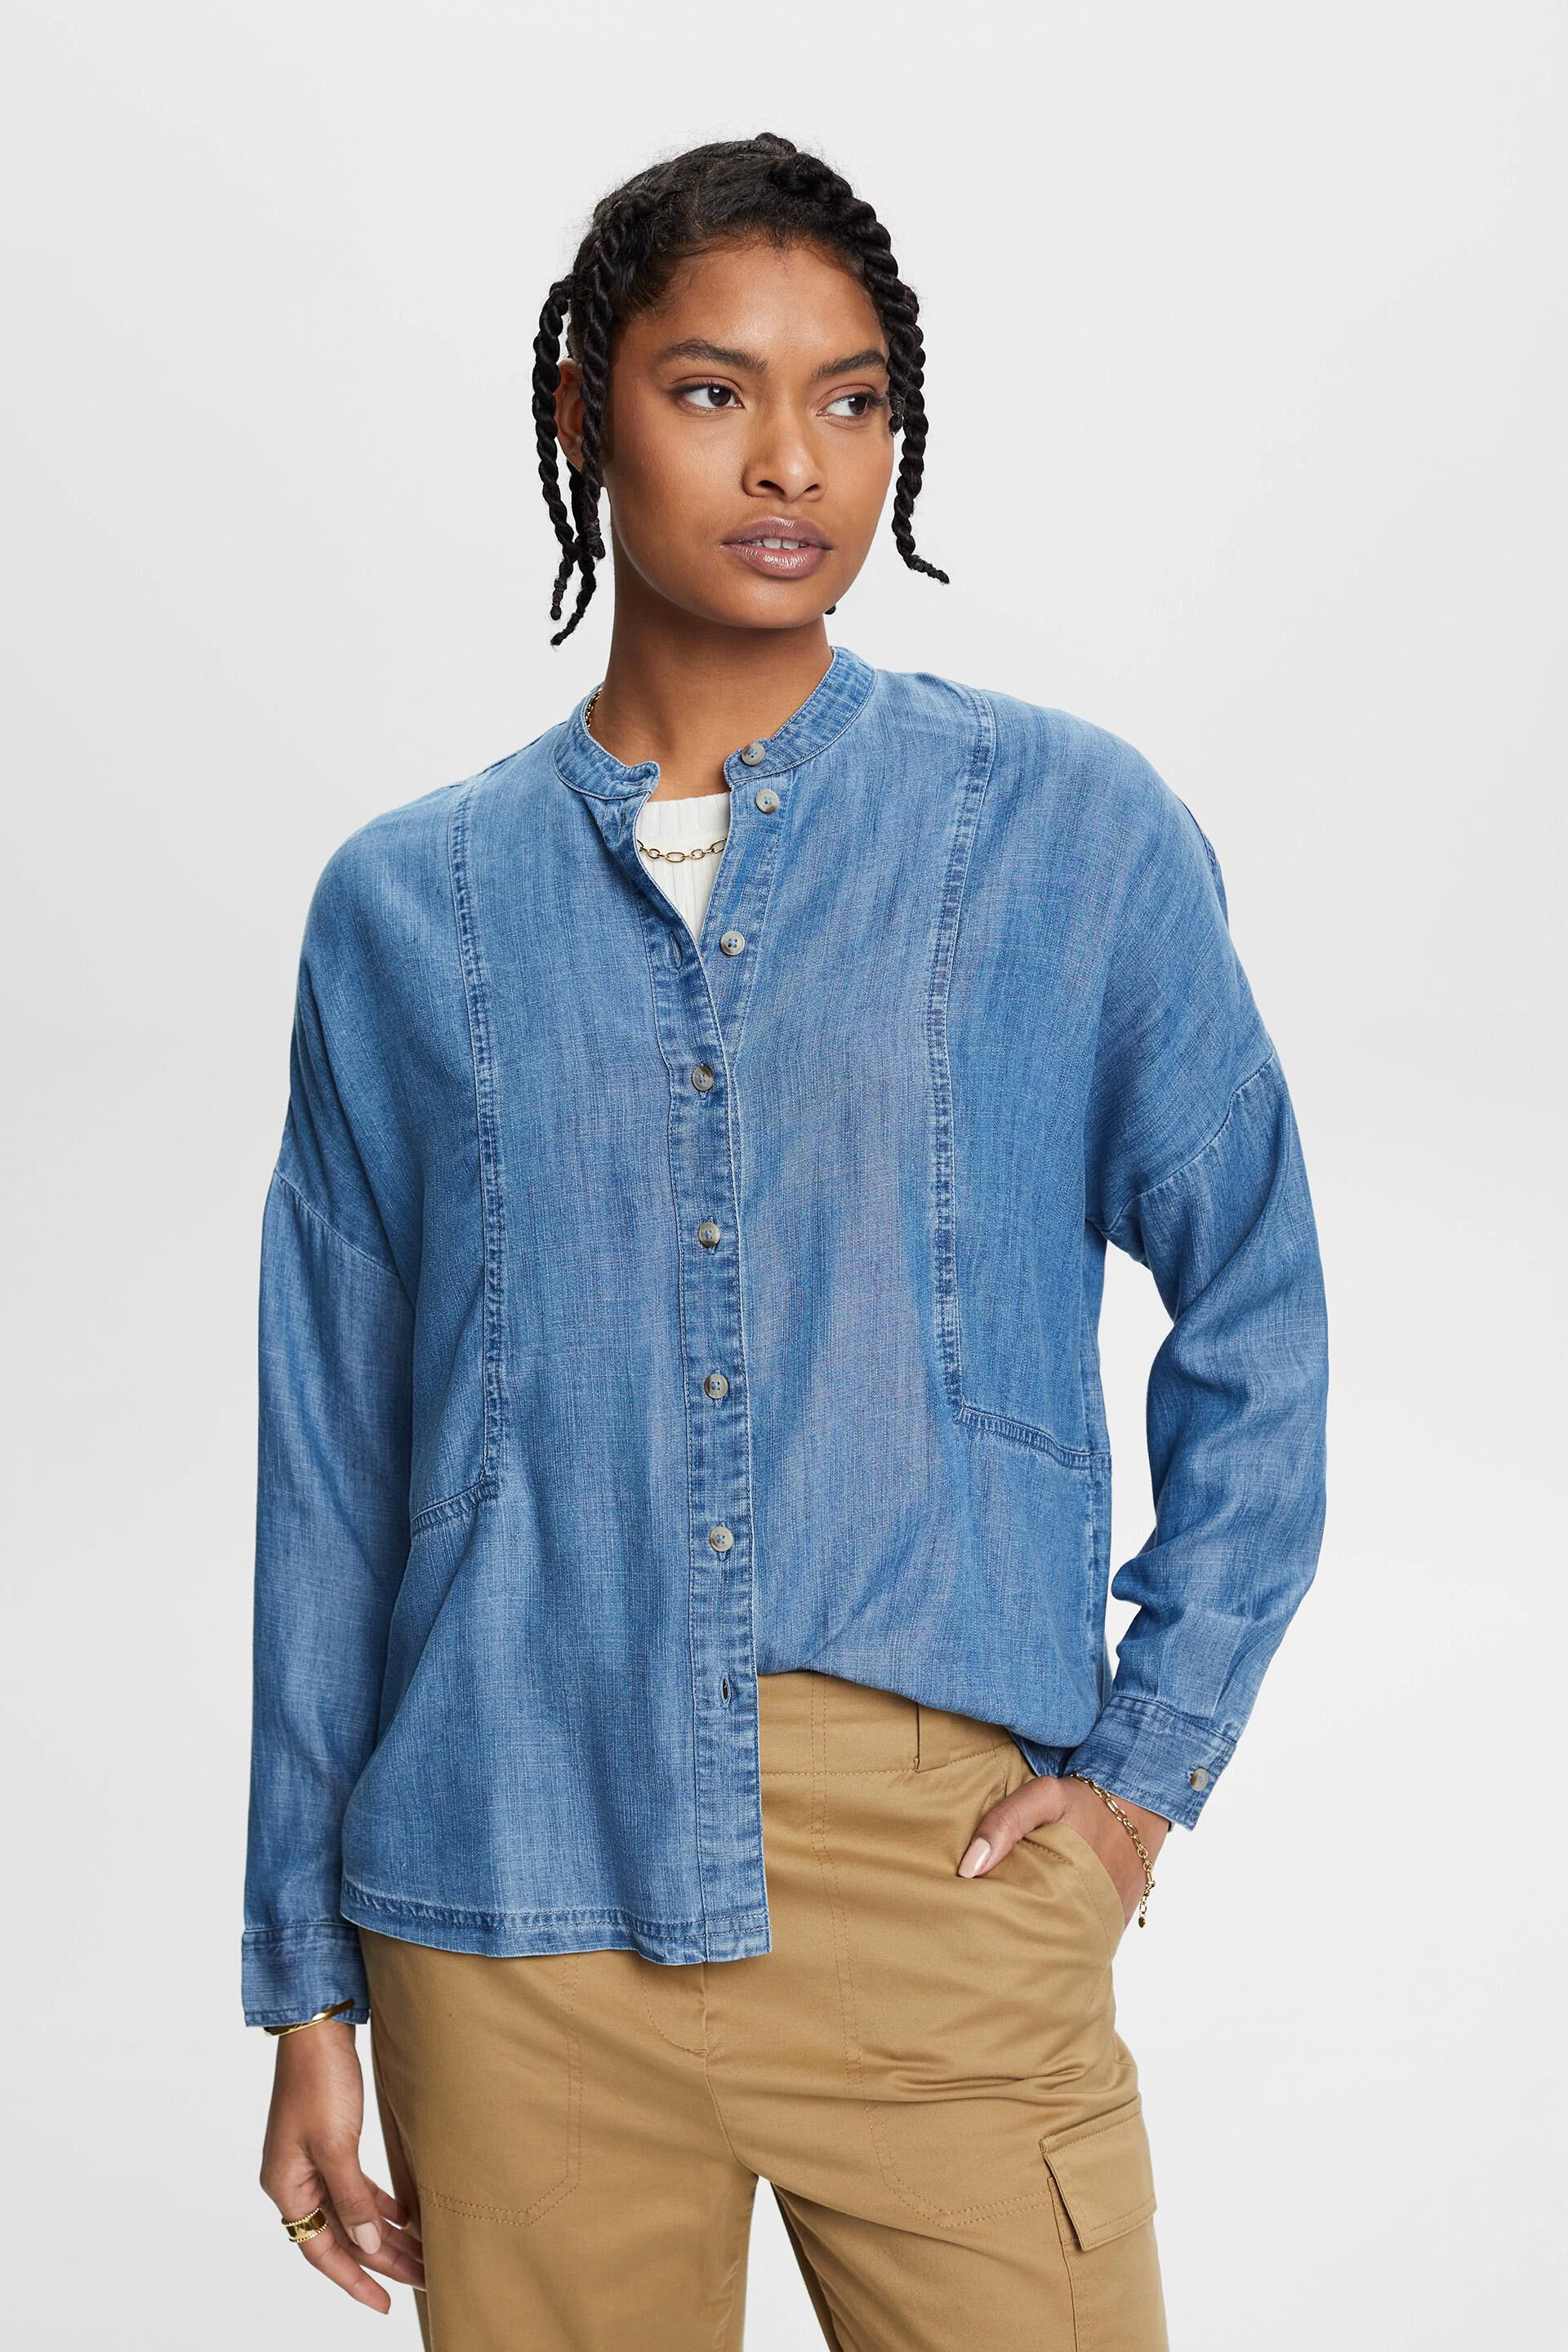 Cozami Casual Light Blue Double Pocket Denim Shirts For Women in Ujjain at  best price by A V Collection - Justdial